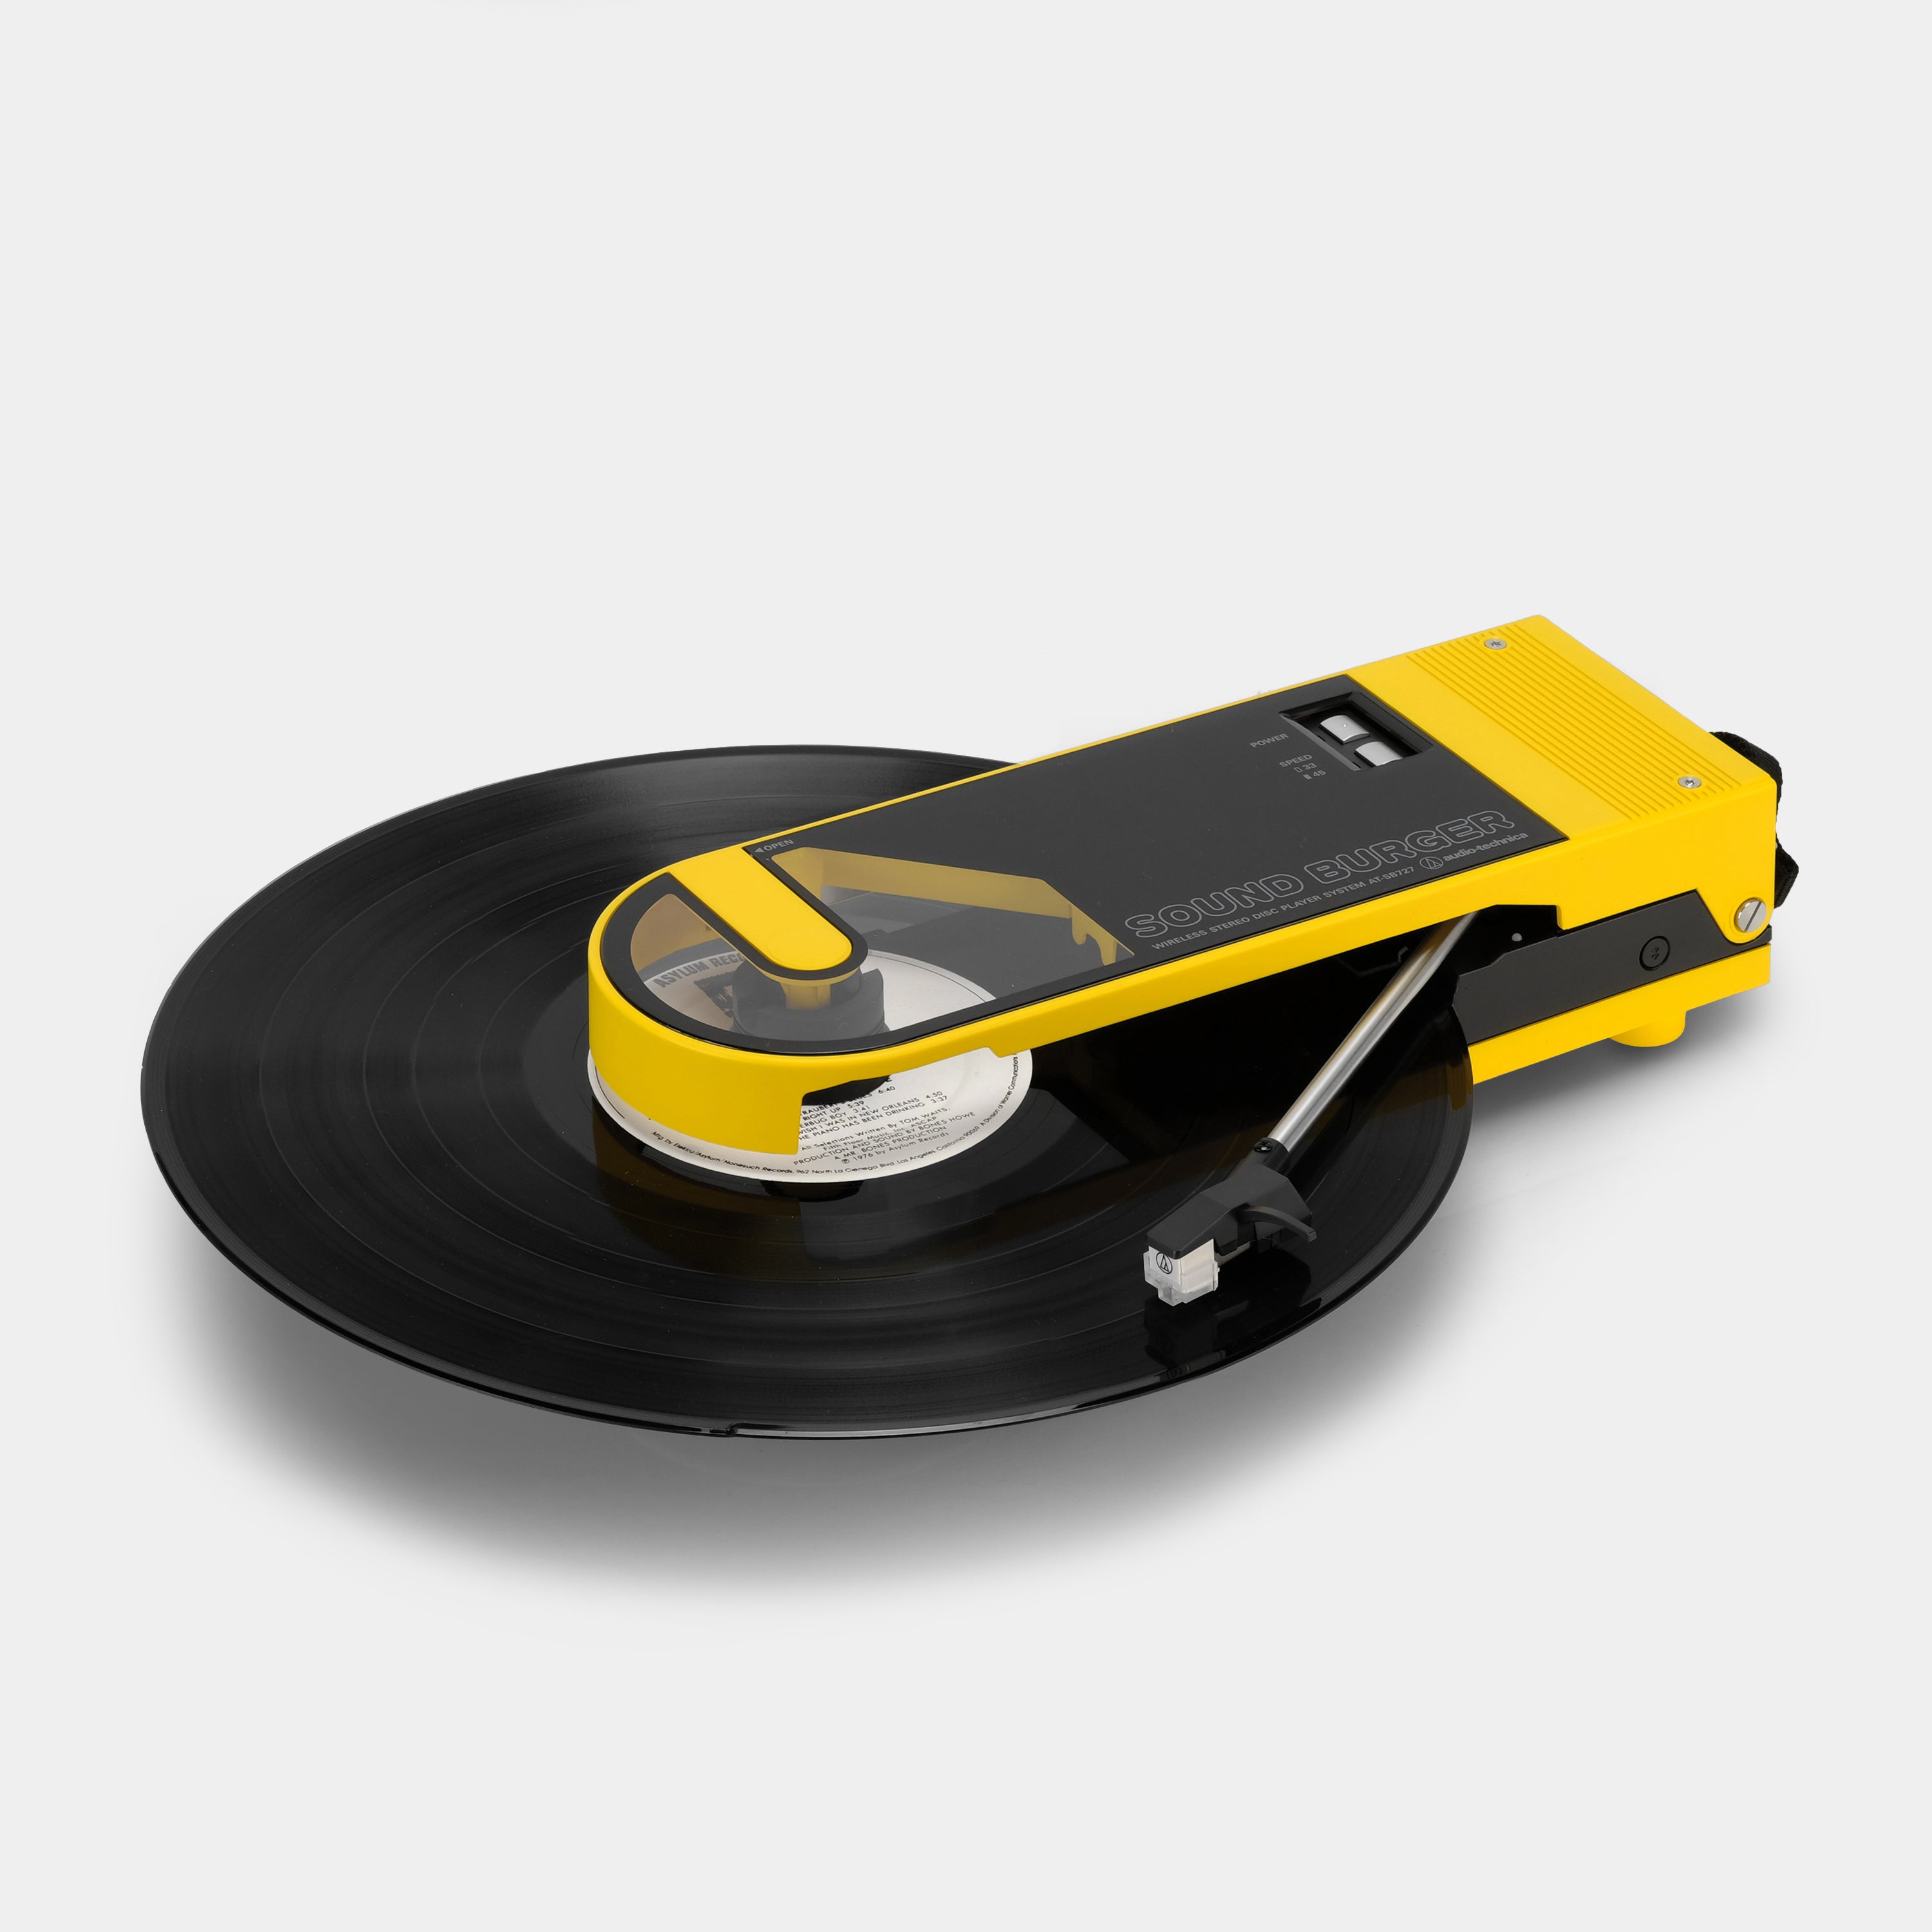 Audio-Technica AT-SB727-BK Sound Burger Compact Portable Turntable - Yellow